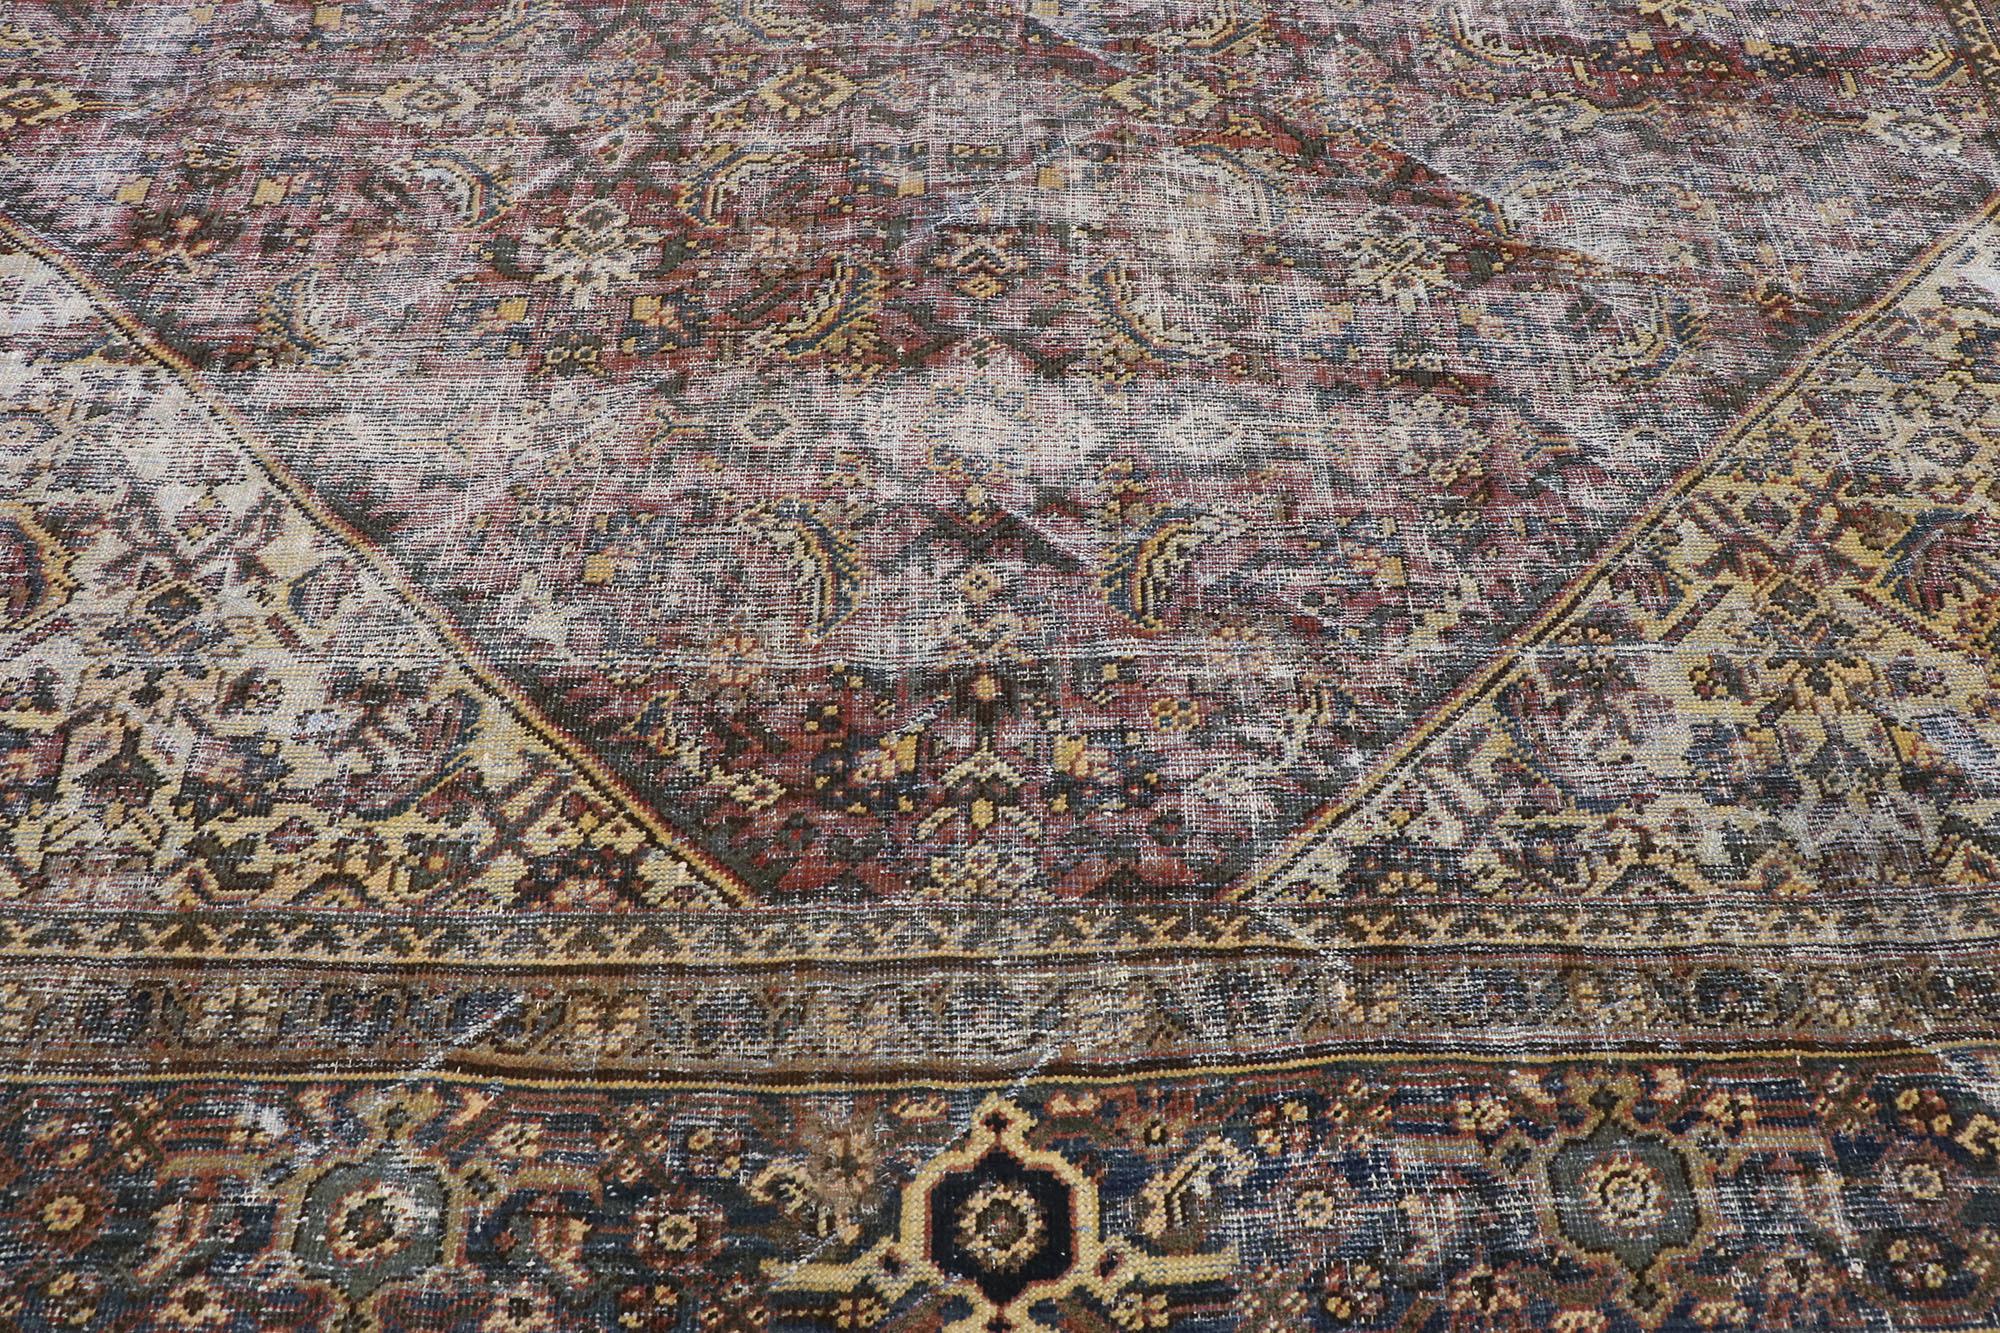  Distressed Antique Persian Mahal Rug with Traditional English Rustic Style  4